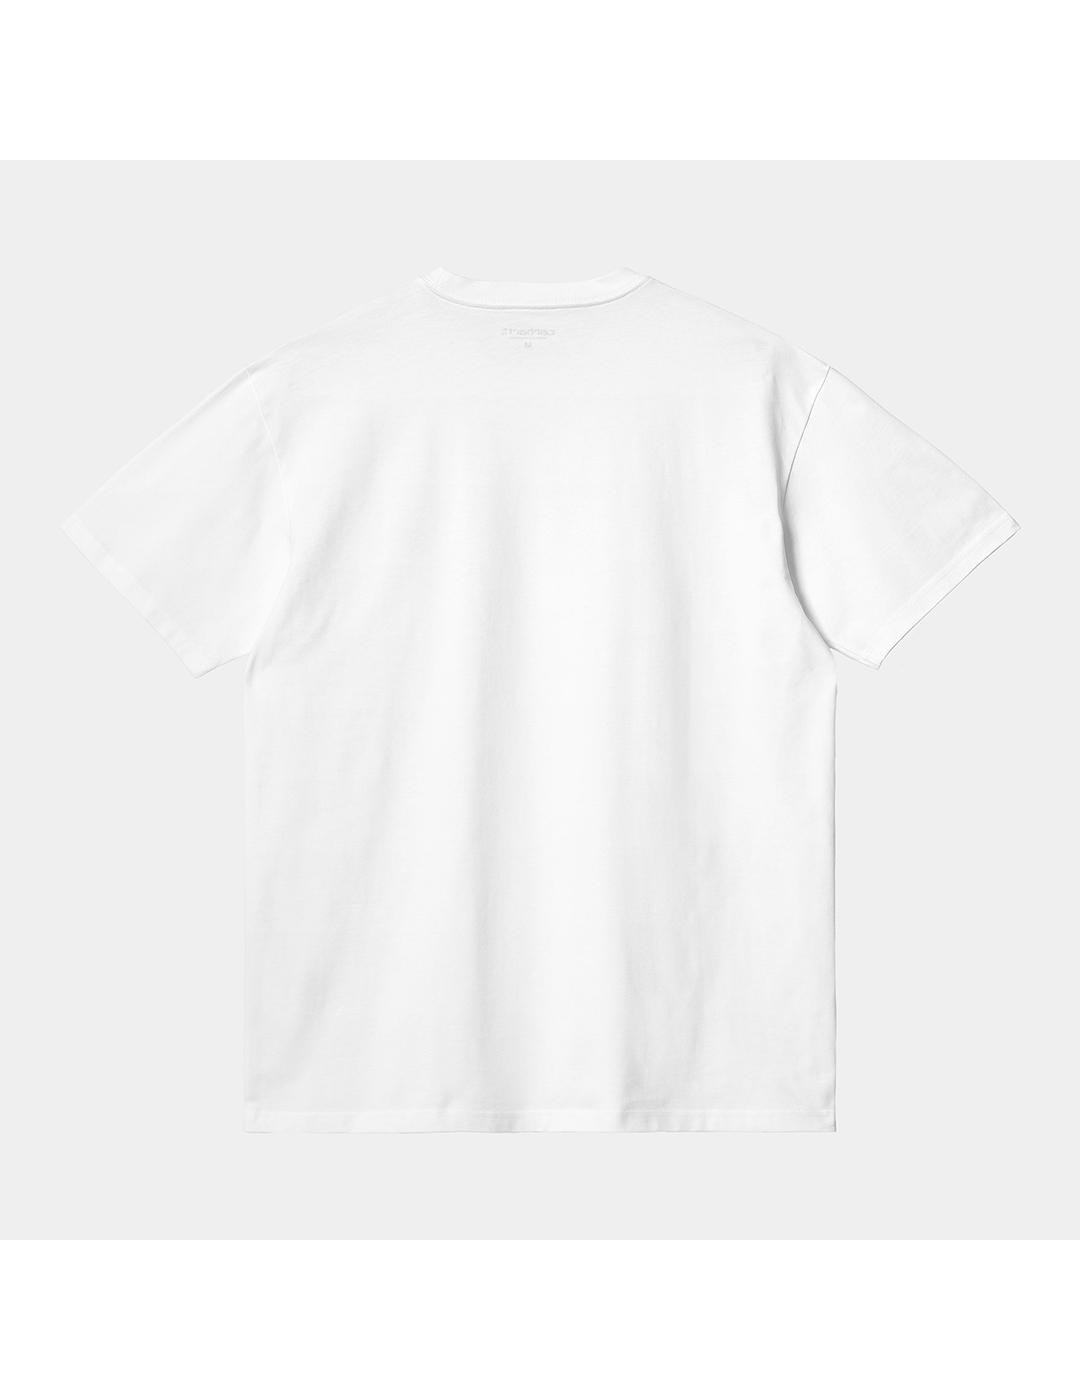 Camiseta Carhartt Wip S/S Chase white/gold para hombre